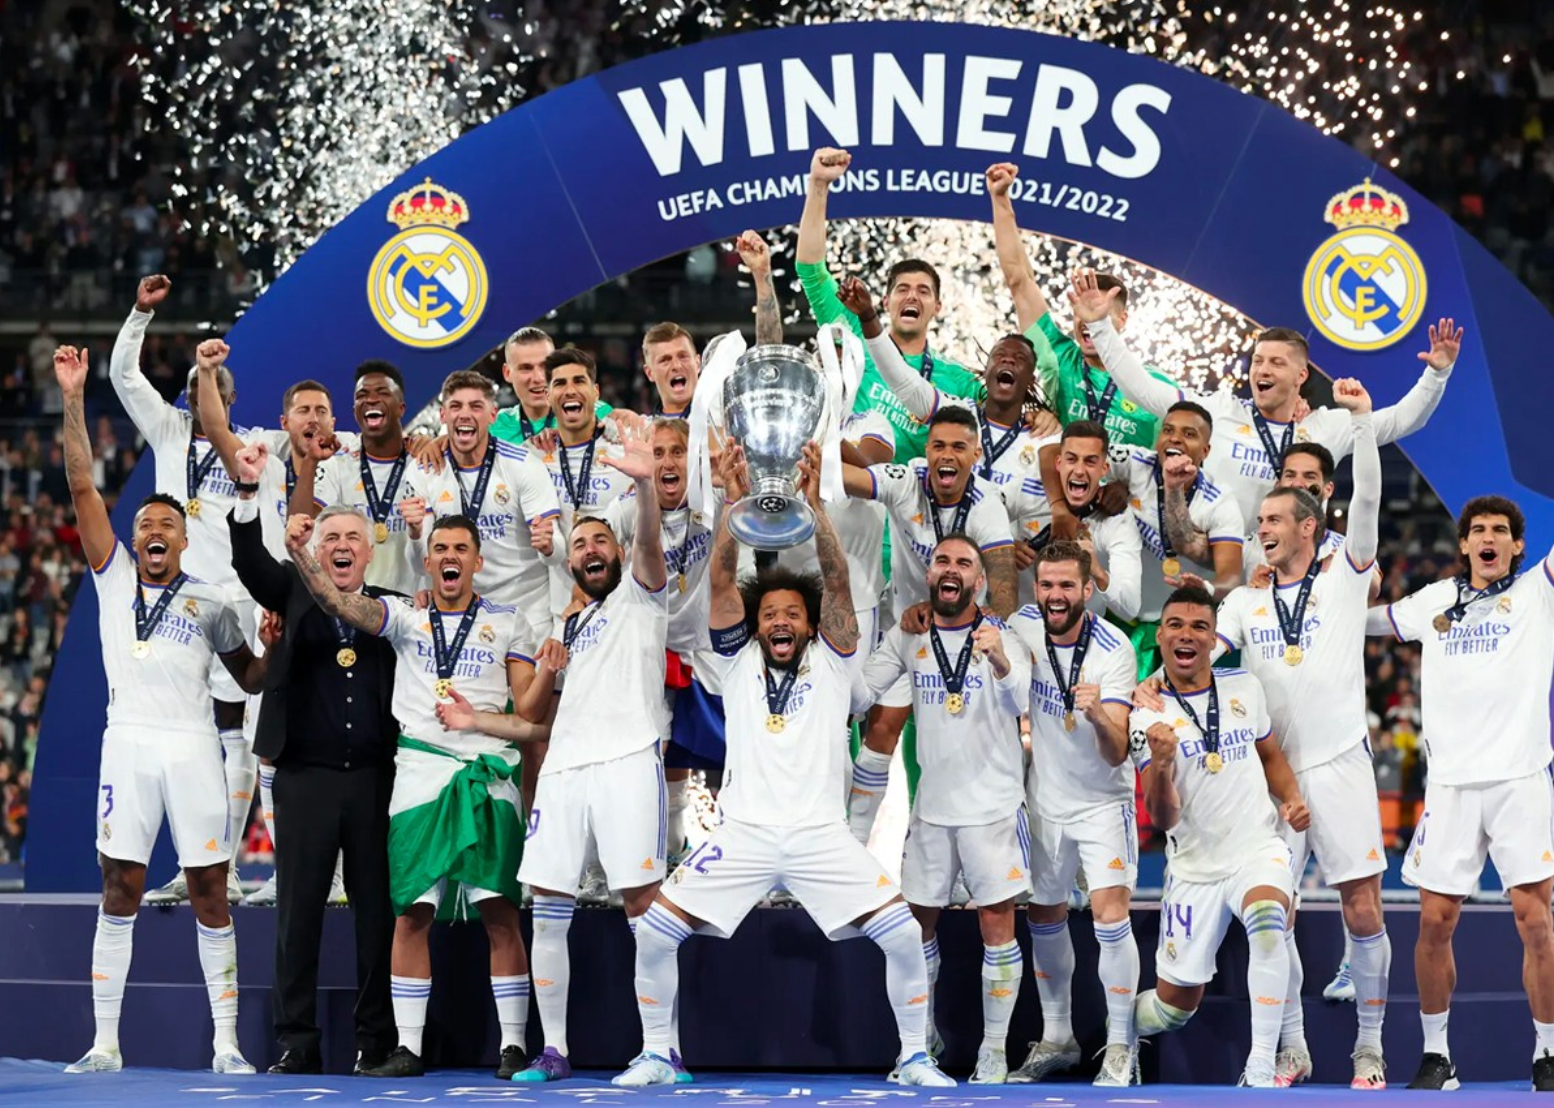 Real Madrid Have Won the Champions League for the 14th Time